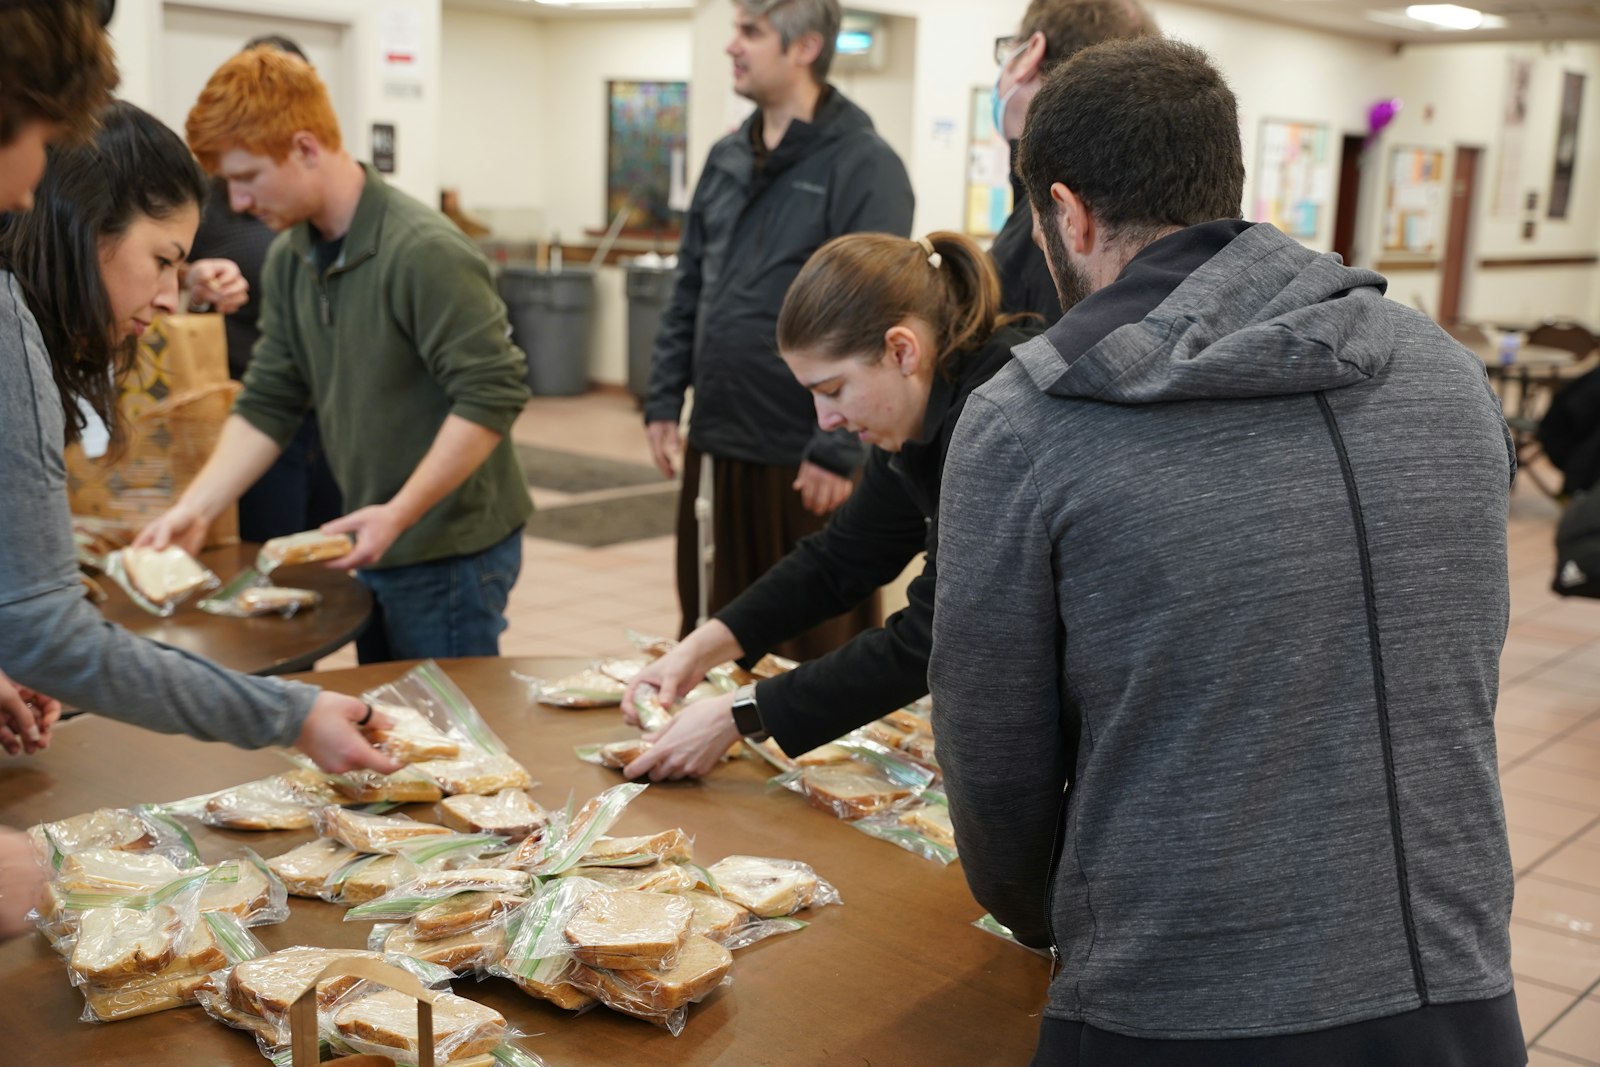 Around 30 young adults made sandwiches and delivered them to the Capuchin Soup Kitchen's Connor location as part of Simple Service Saturday, a staple of the Solanus Casey YouFra chapter.